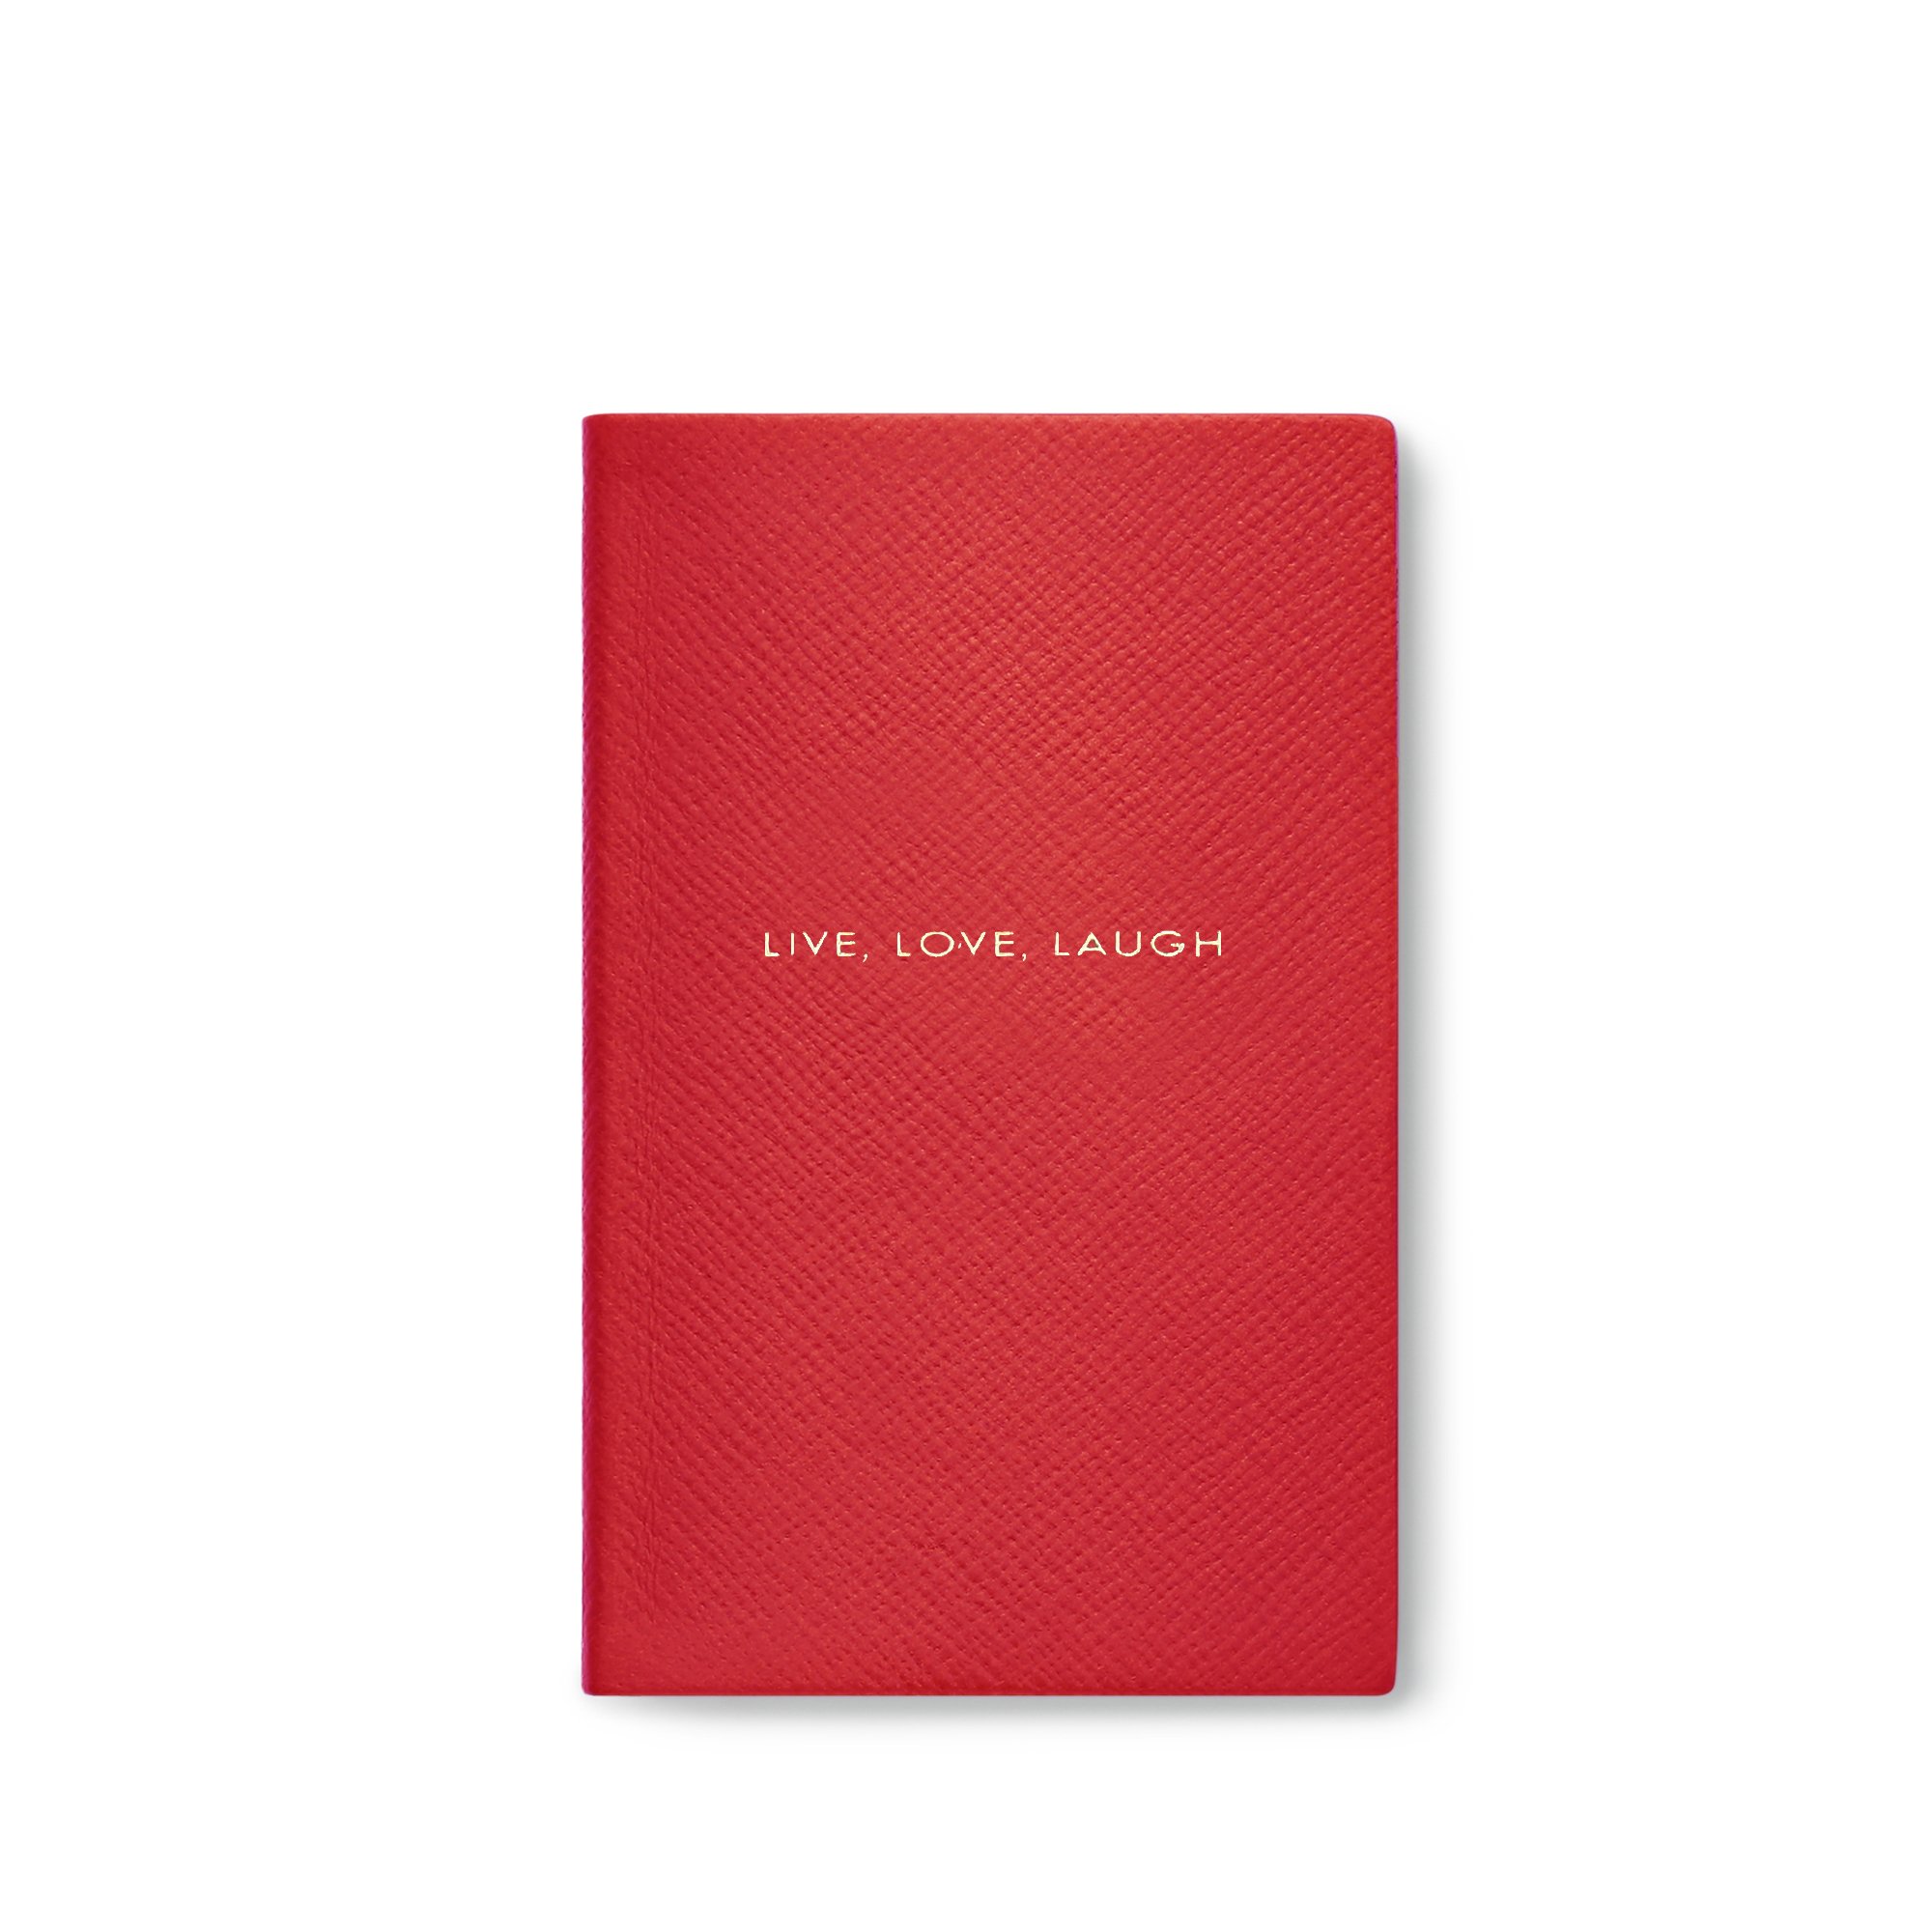 Smythson Live Love Laugh Panama Notebook In Scarlet Red